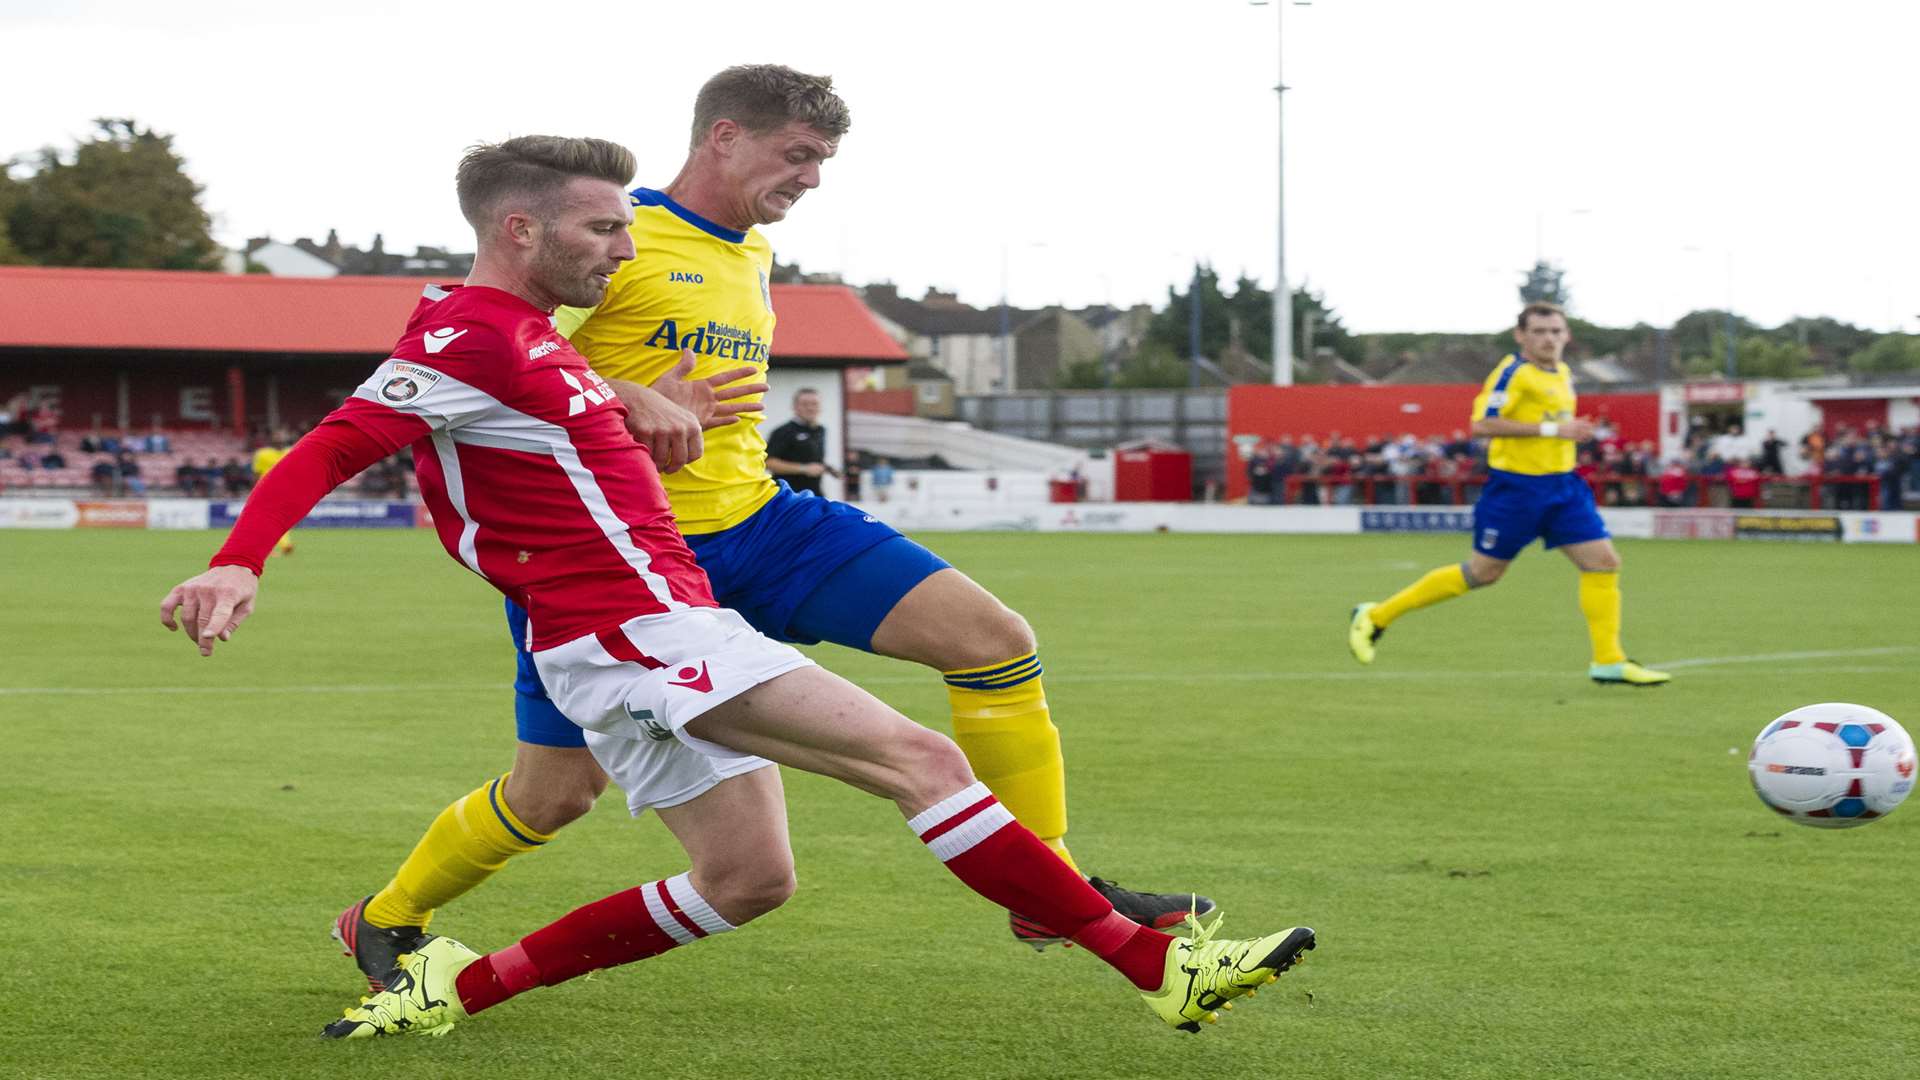 Matt Fish gets away from Alan Massey to cross from the Ebbsfleet right Picture: Andy Payton